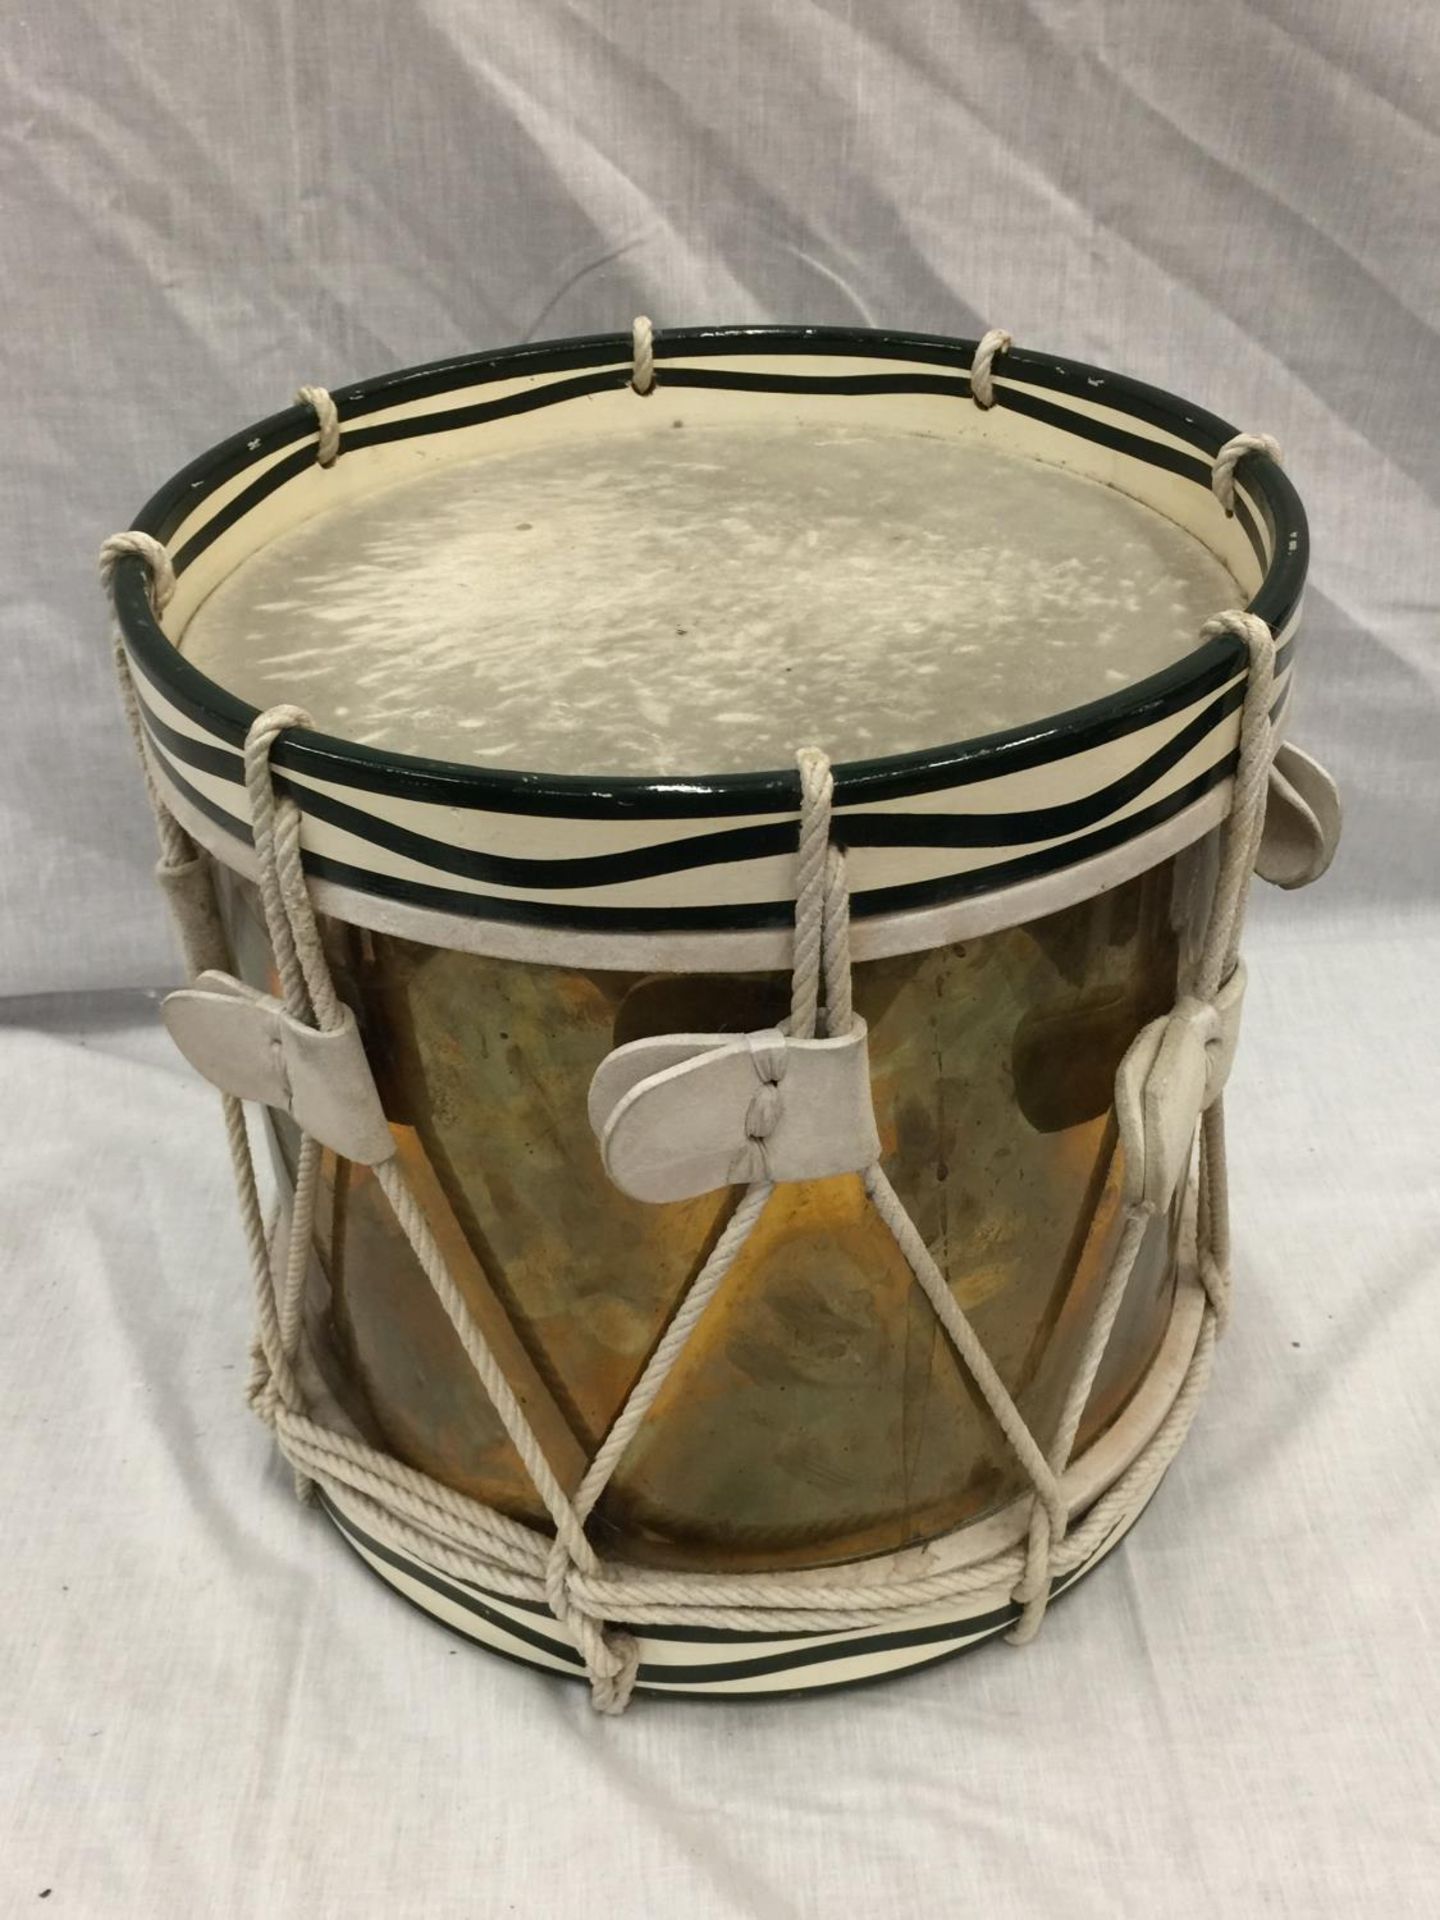 A MARCHING BAND DRUM WITH WORCESTERSHIRE REGIMENT SOUTH AFRICA 1900 - 02 DECORATION - Image 3 of 4